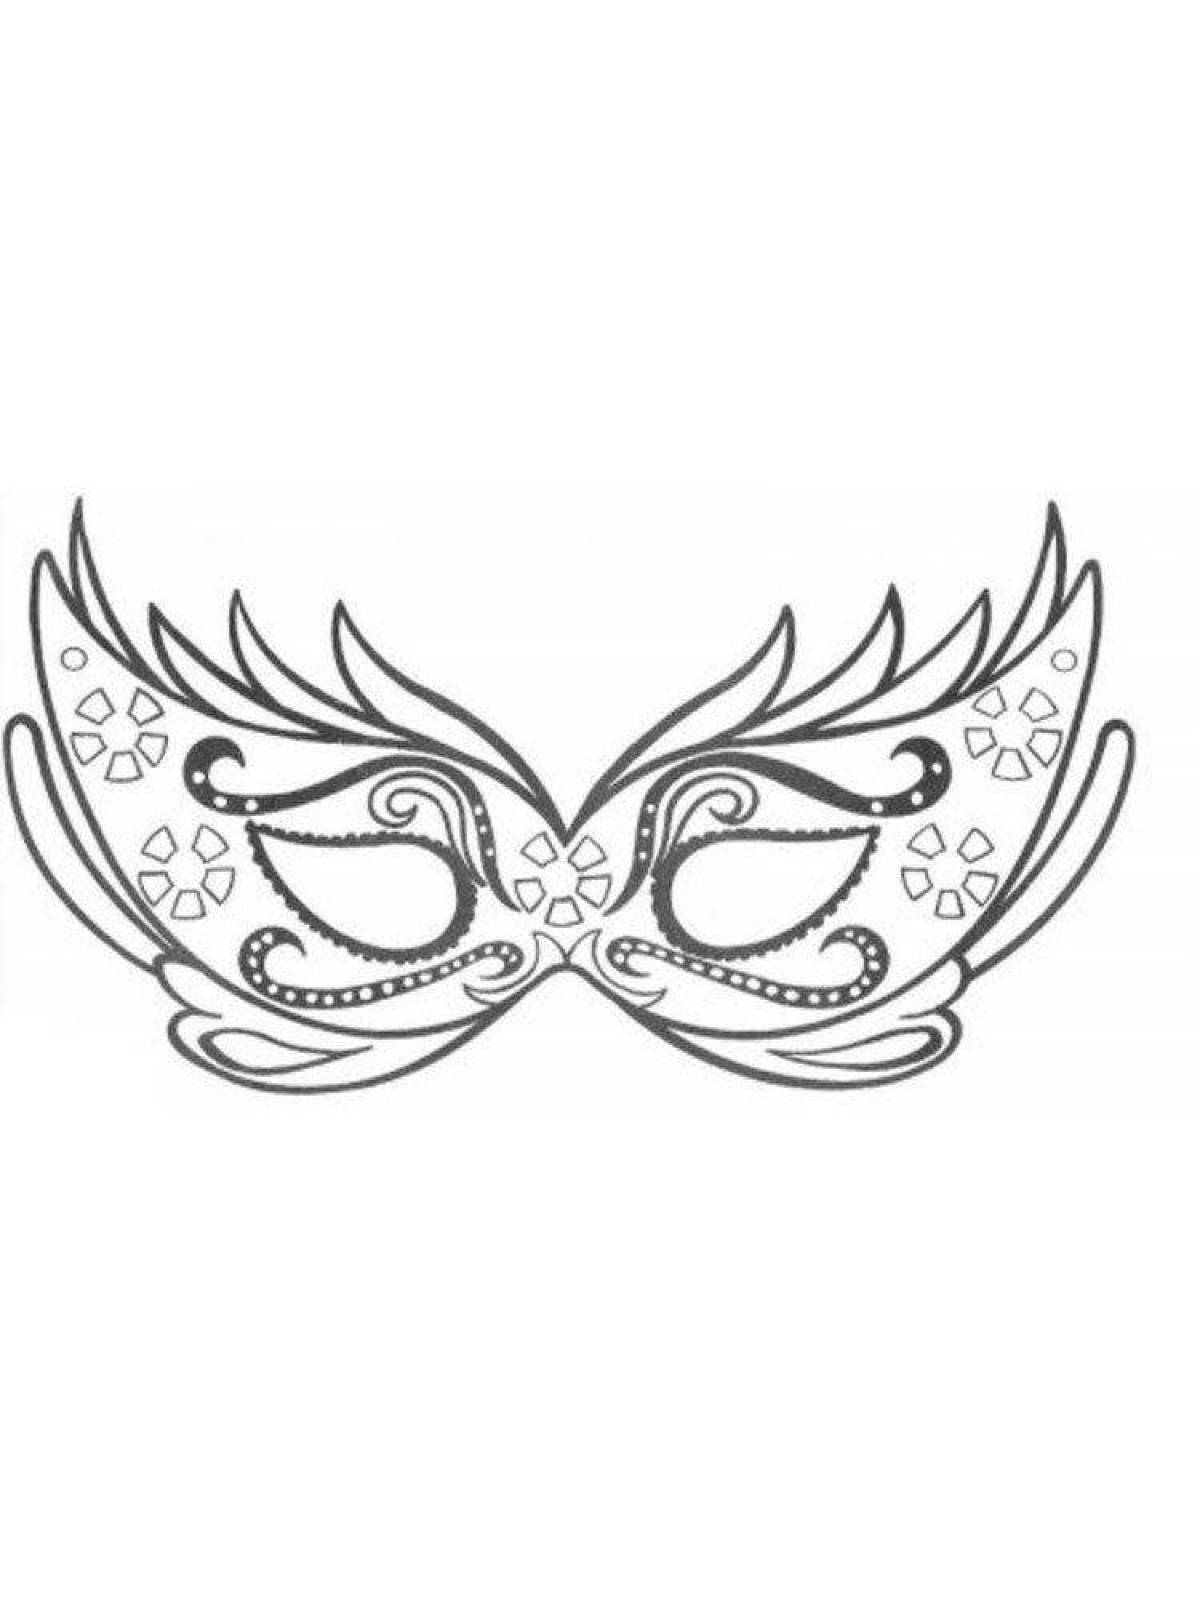 Coloring page dazzling carnival mask